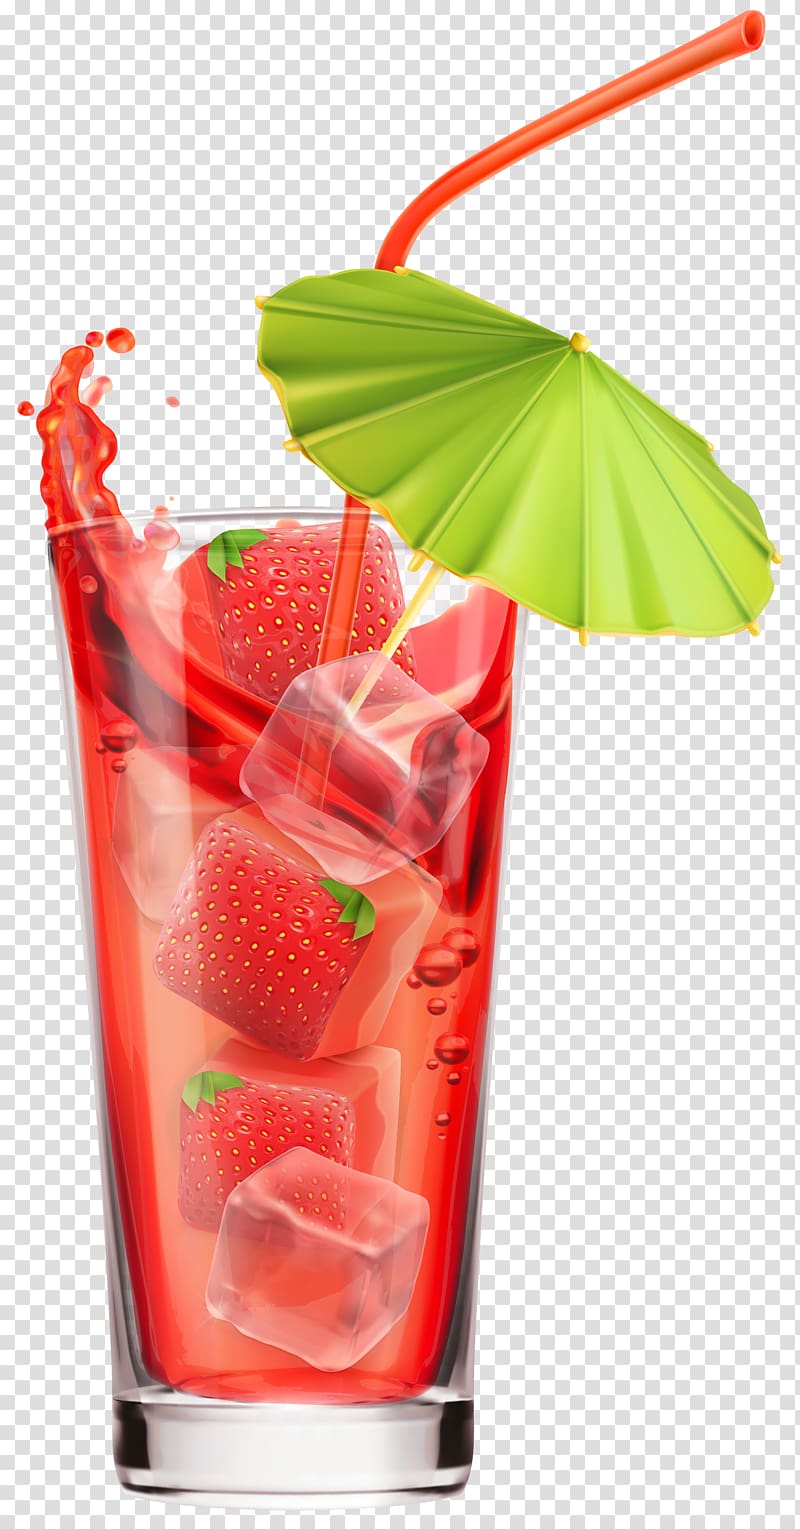 strawberry juice, Cocktail Juice Fizzy Drinks Martini Punch, Milkshake transparent background PNG clipart